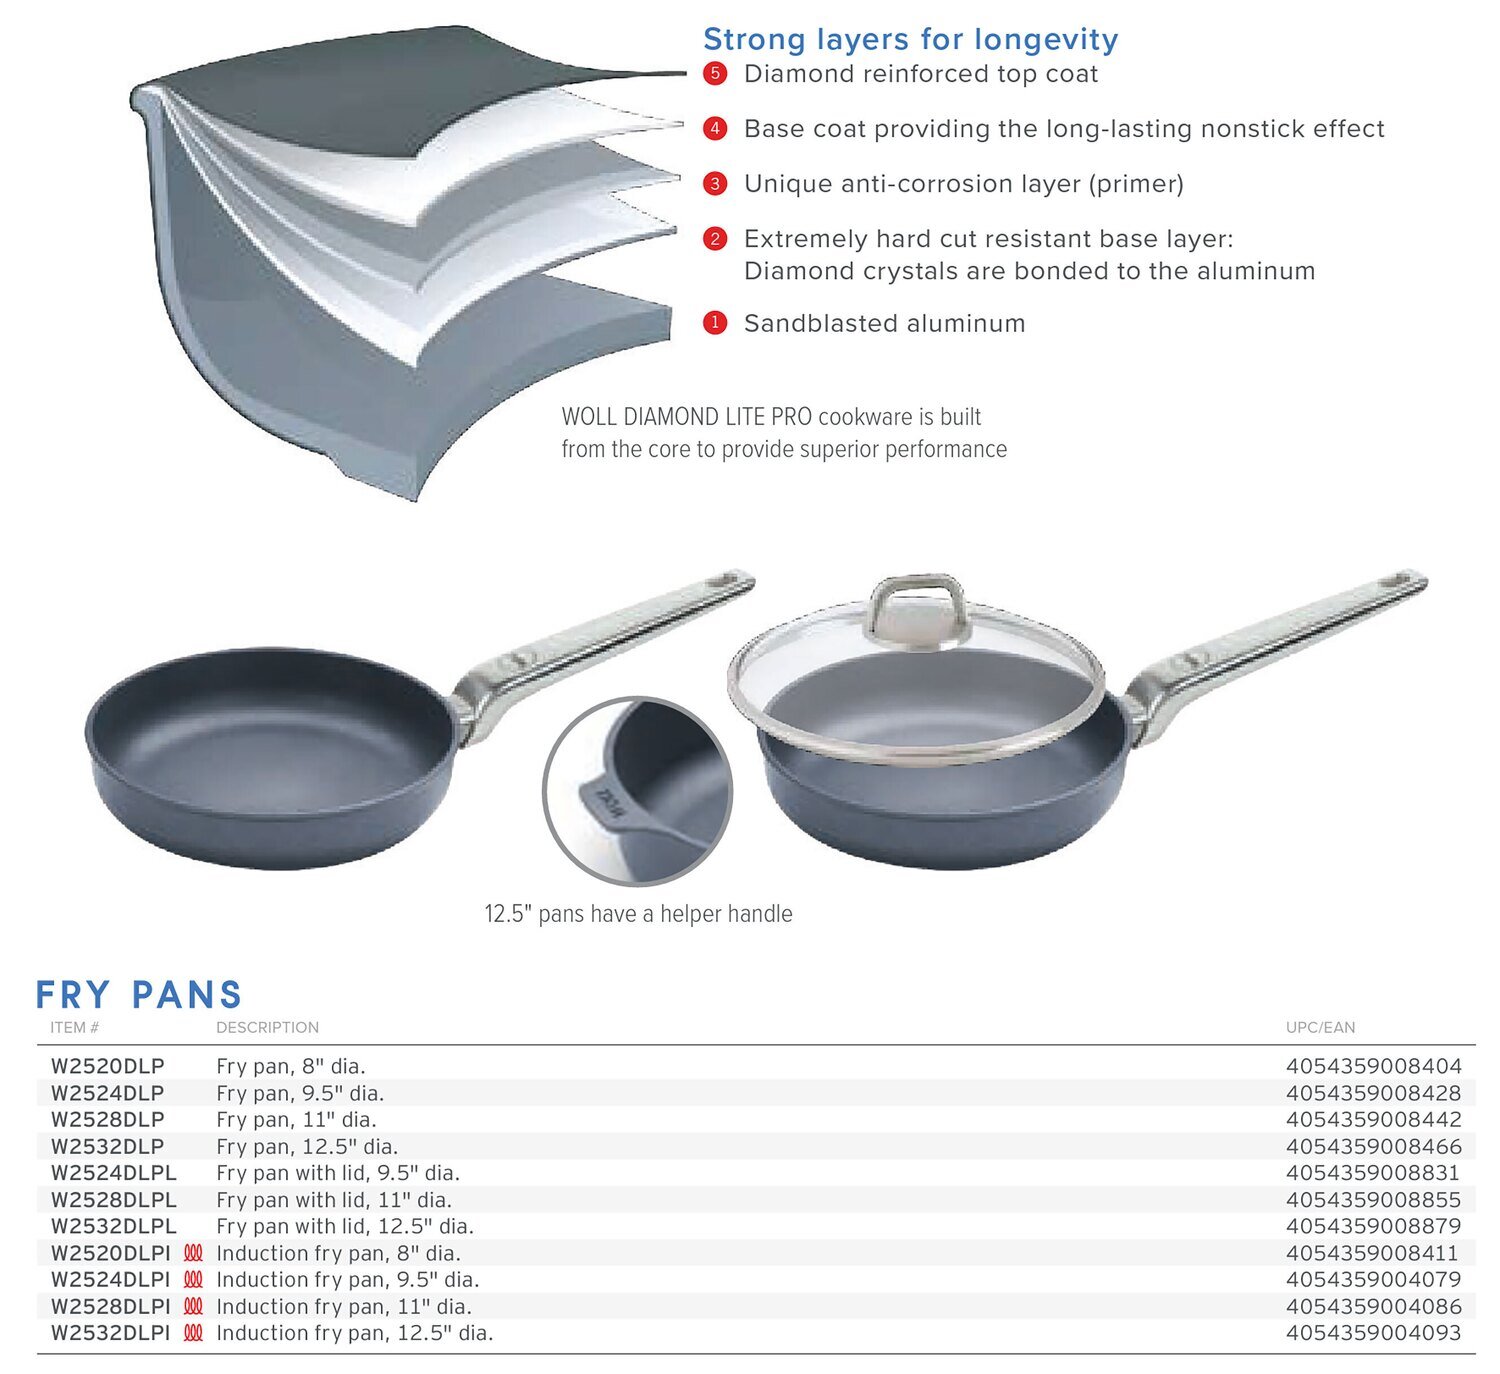 Frieling Diamond Lite Induction Fry Pan with Lid 12.5" W532DPIL